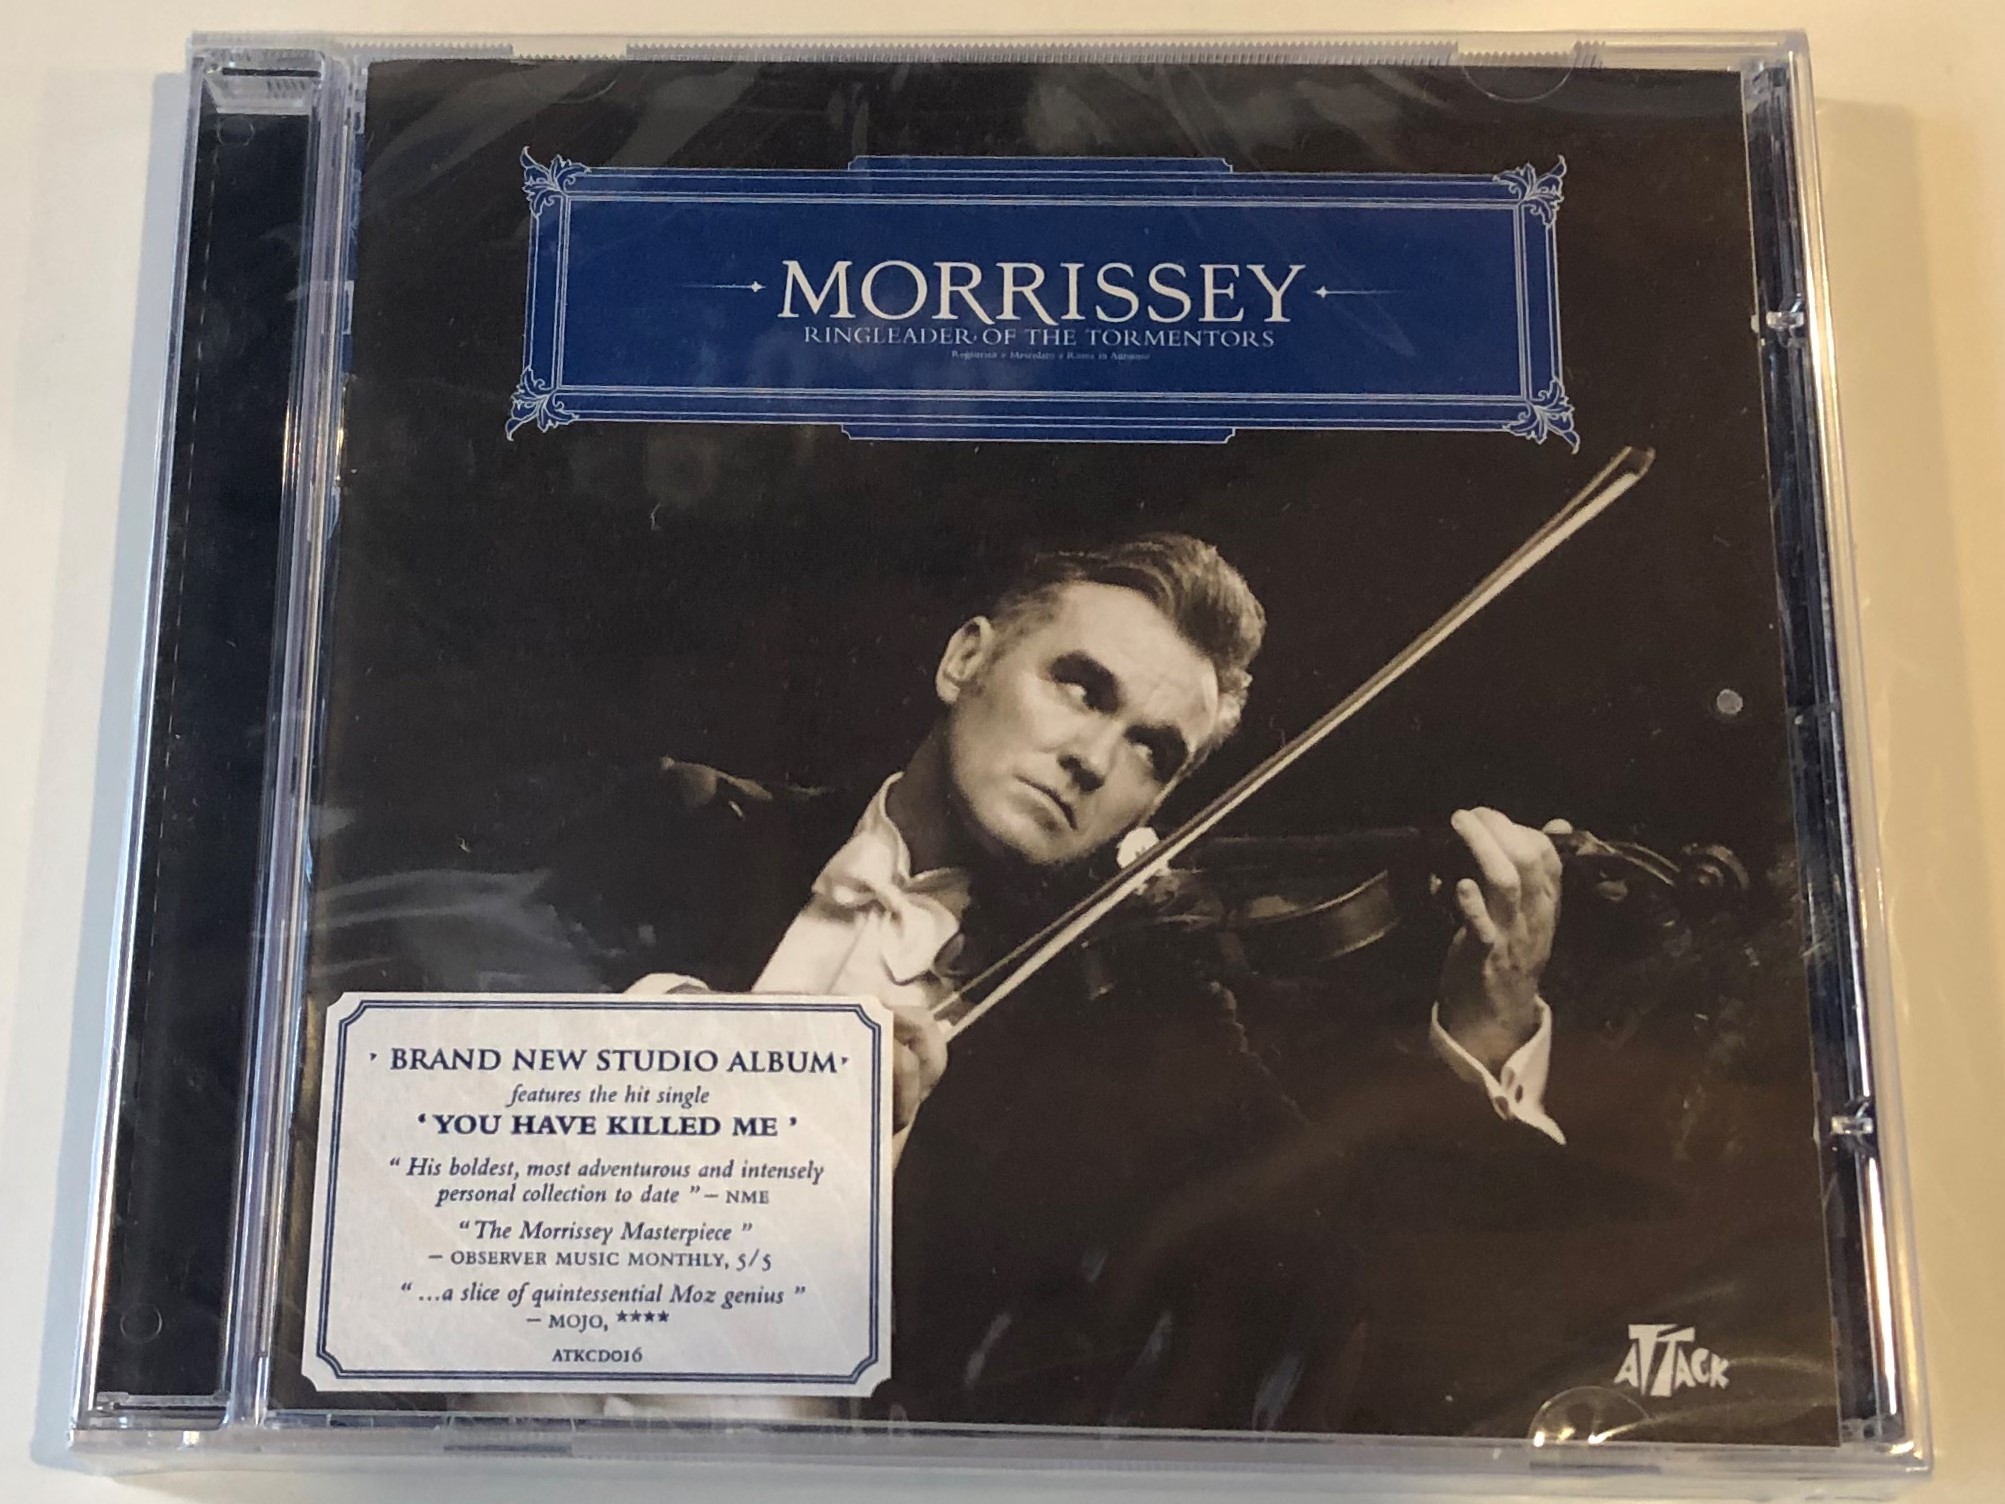 morrissey-ringleader-of-the-tormentors-brand-new-studio-album-features-the-hit-single-you-have-killed-me-attack-records-audio-cd-2006-atkcd016-1-.jpg